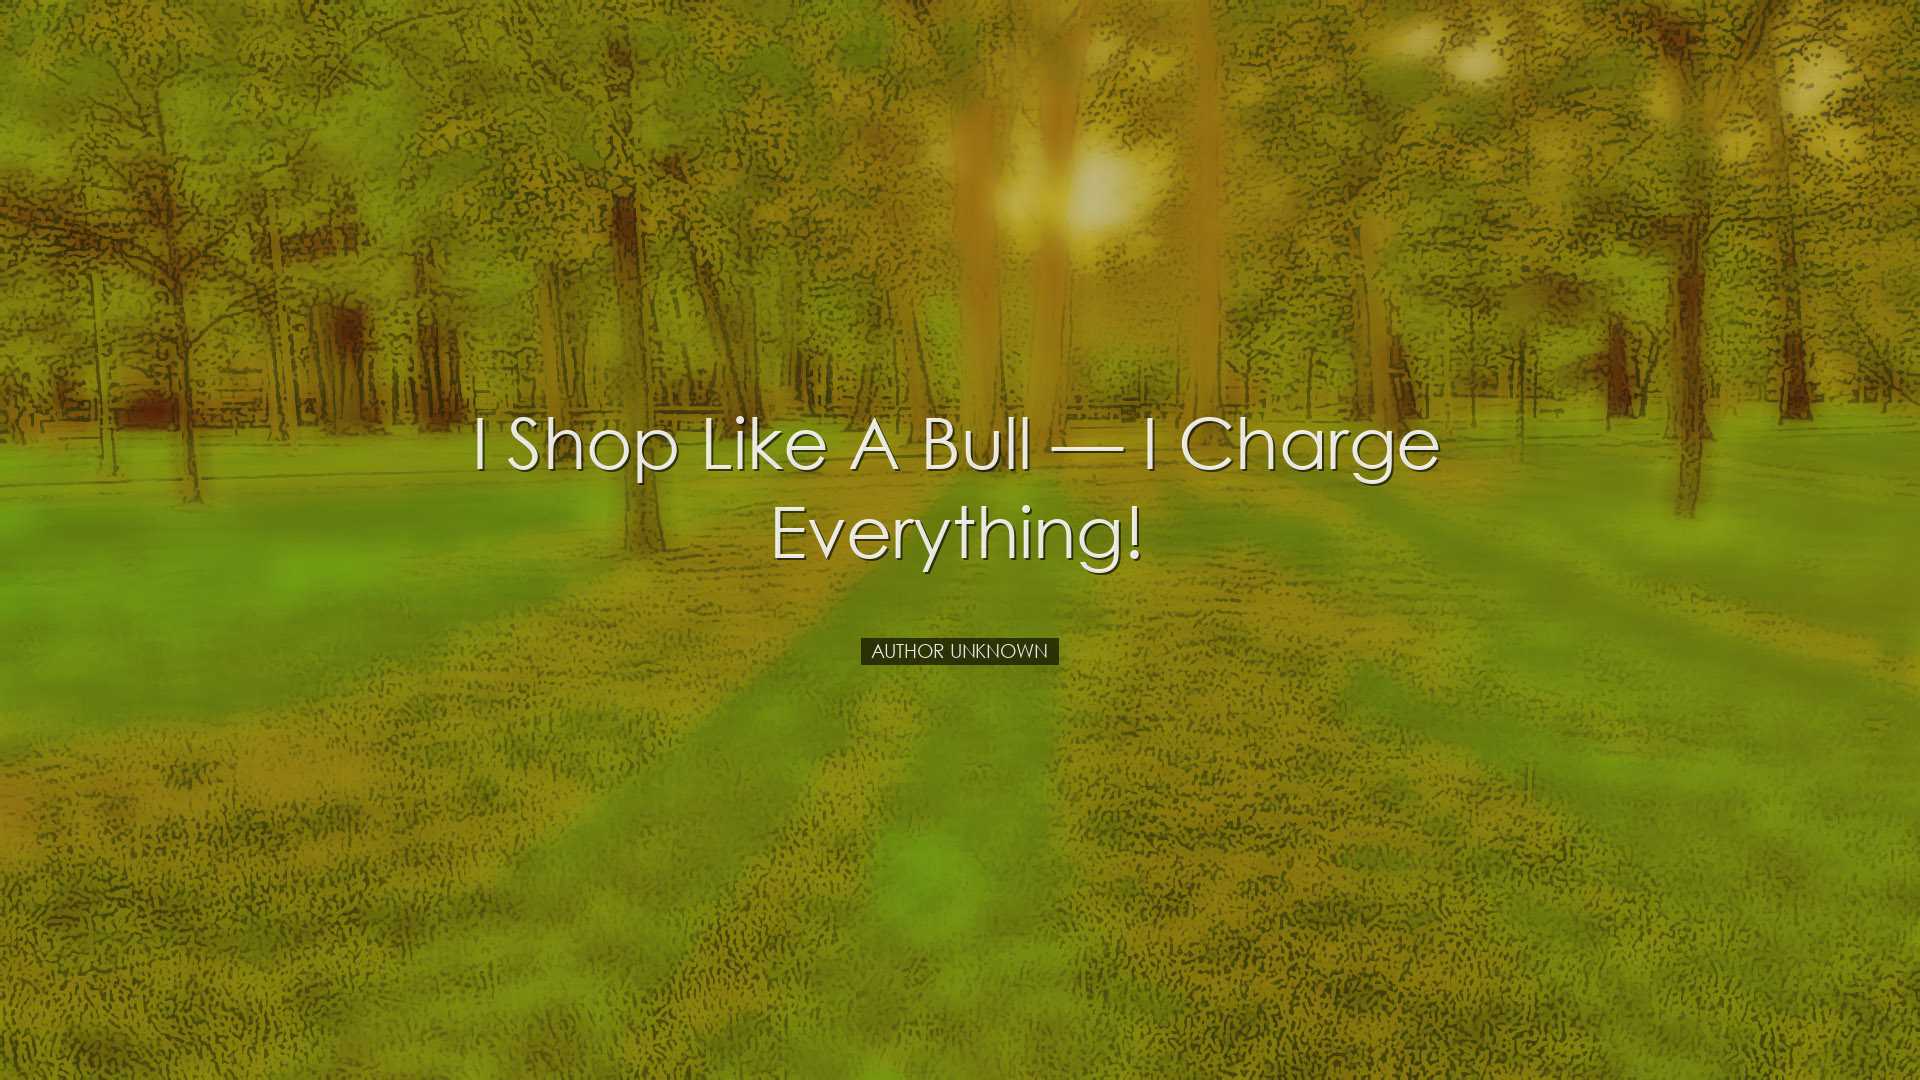 I shop like a bull — I charge everything! - Author Unknown